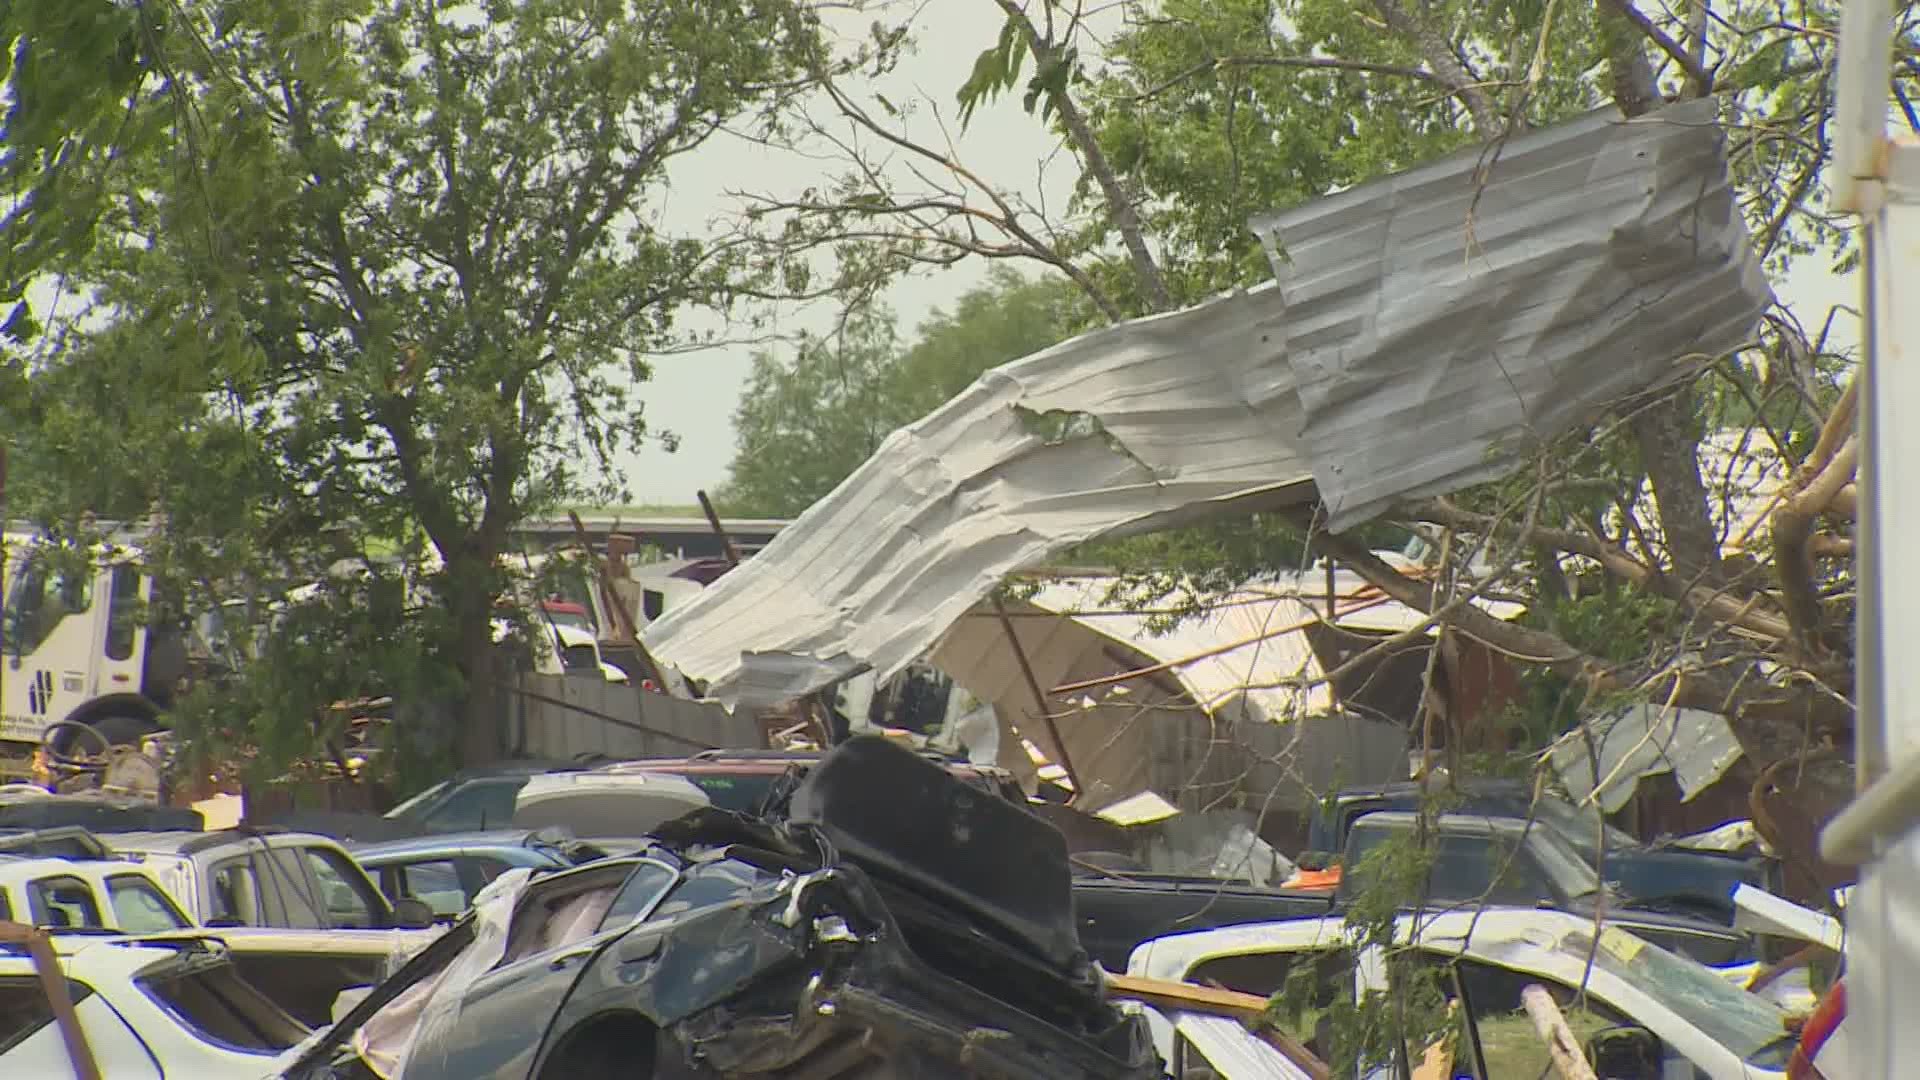 Roofs were ripped off and buildings destroyed near Forreston, Blum and other parts of North Texas amidst severe storms Monday, May 3.